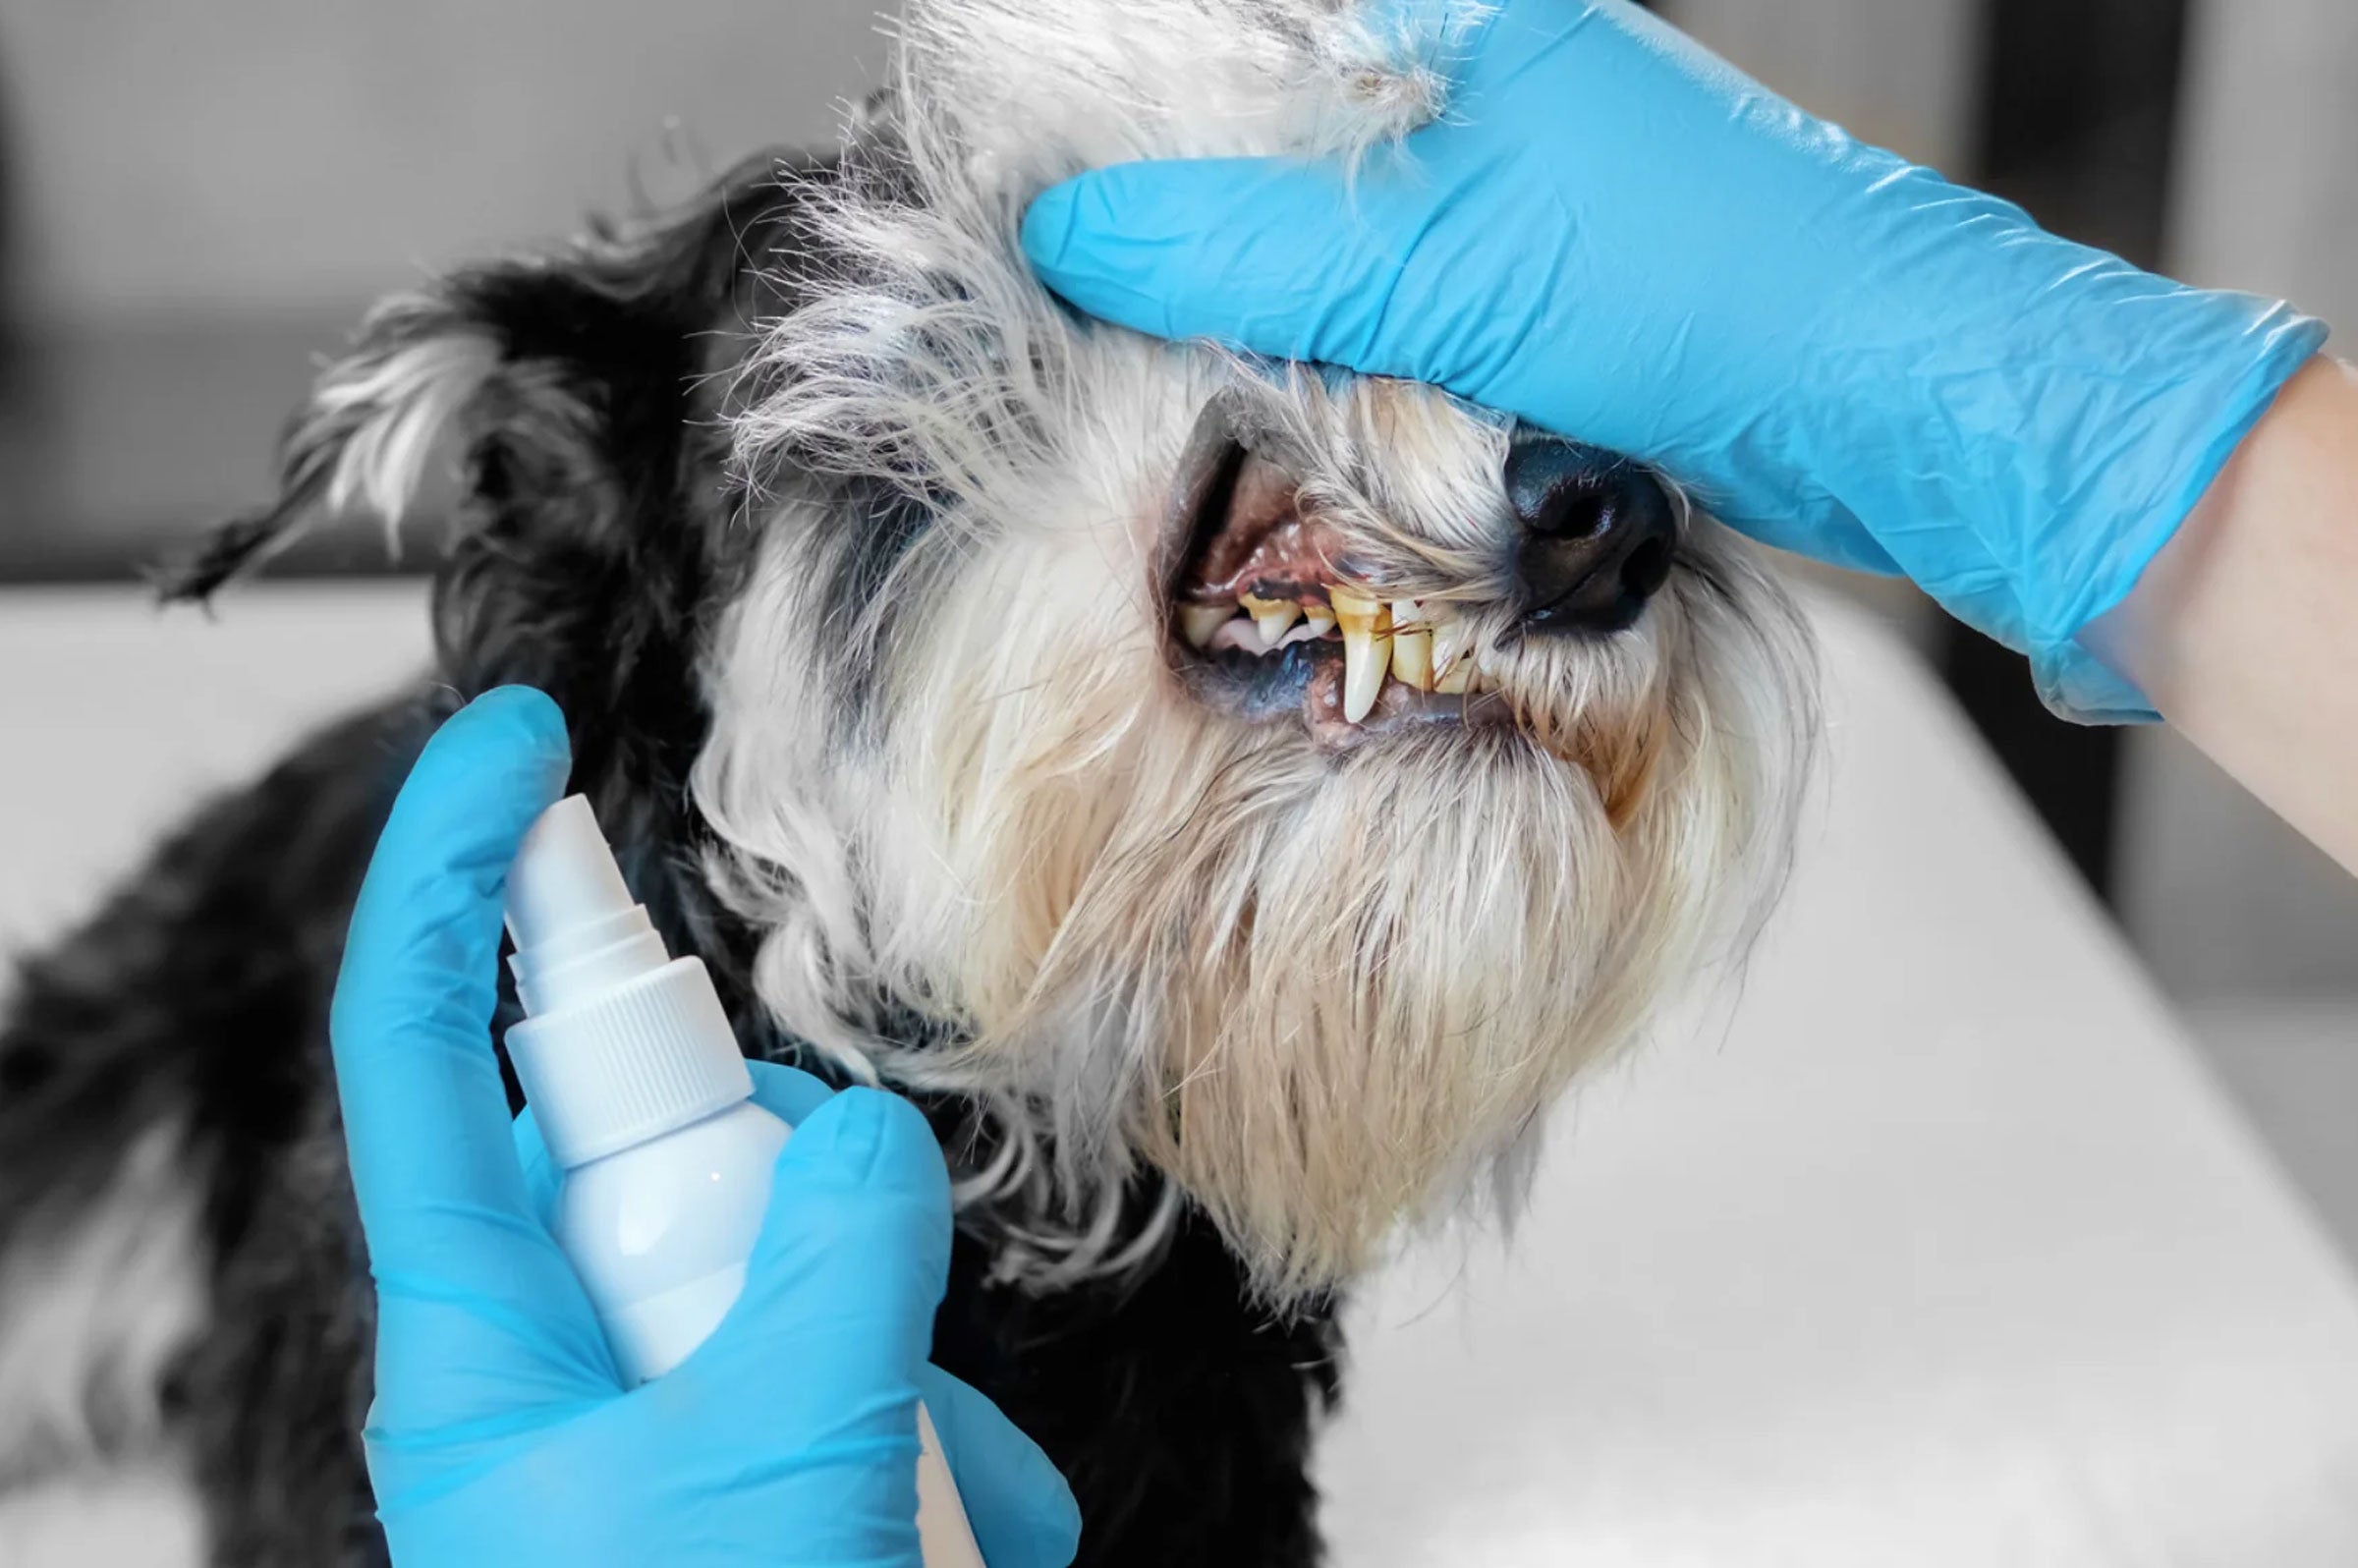 Oral Disease Can Lead To Life-Threatening Illness. Is Your Cat or Dog at Risk?